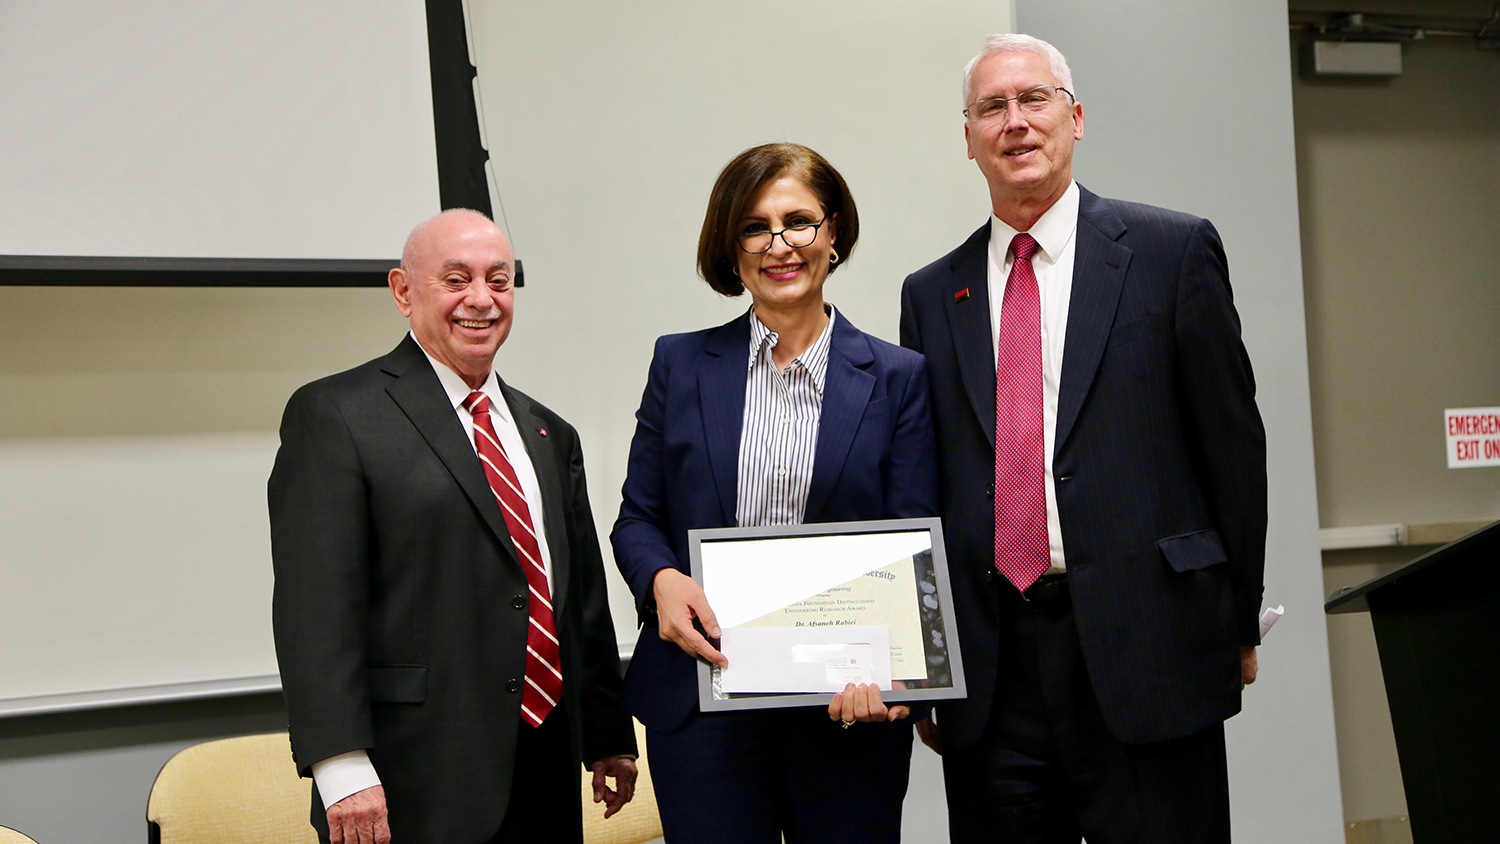 Dr. Afsaneh Rabiei, center, accepts Alcoa Foundation Distinguished Engineering Research Award from Dr. Louis Martin-Vega, left, and Dr. John Gilligan.